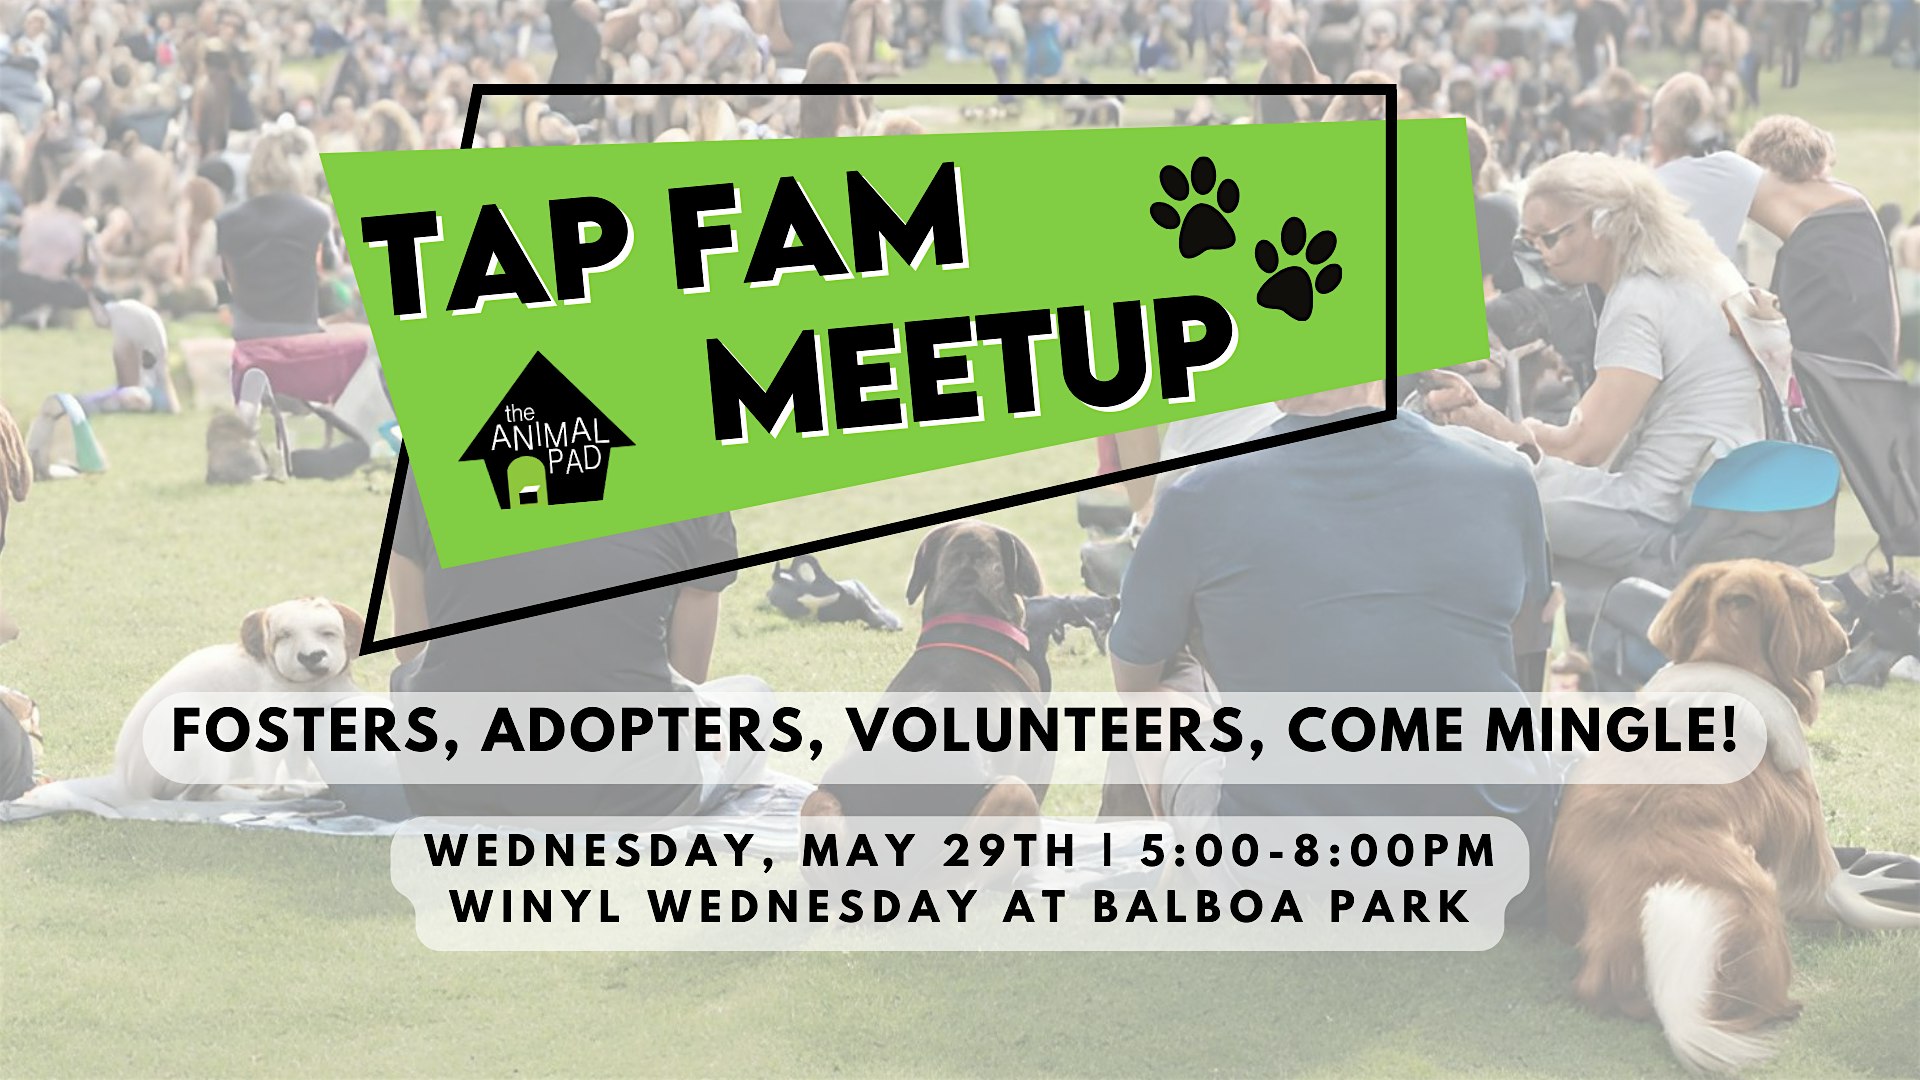 TAP Fam Meetup at Winyl Wednesday